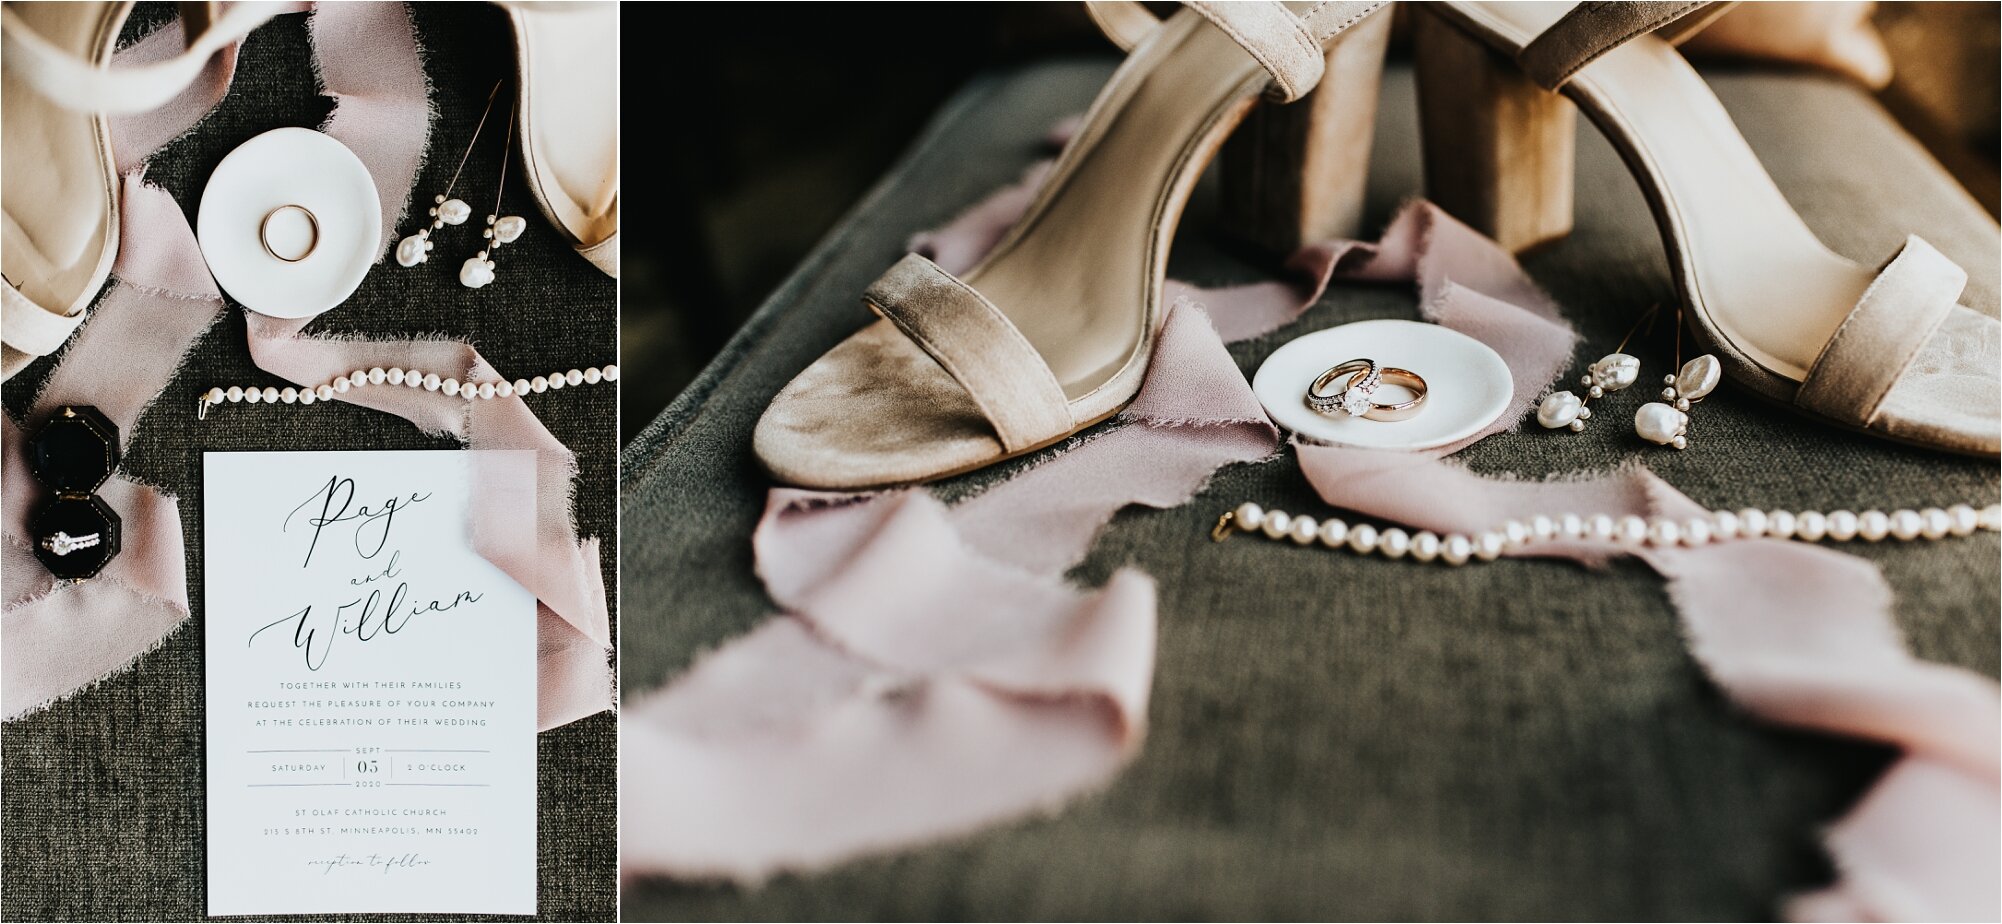  details shoes dress earrings necklace invitations invites minneapolis wedding 